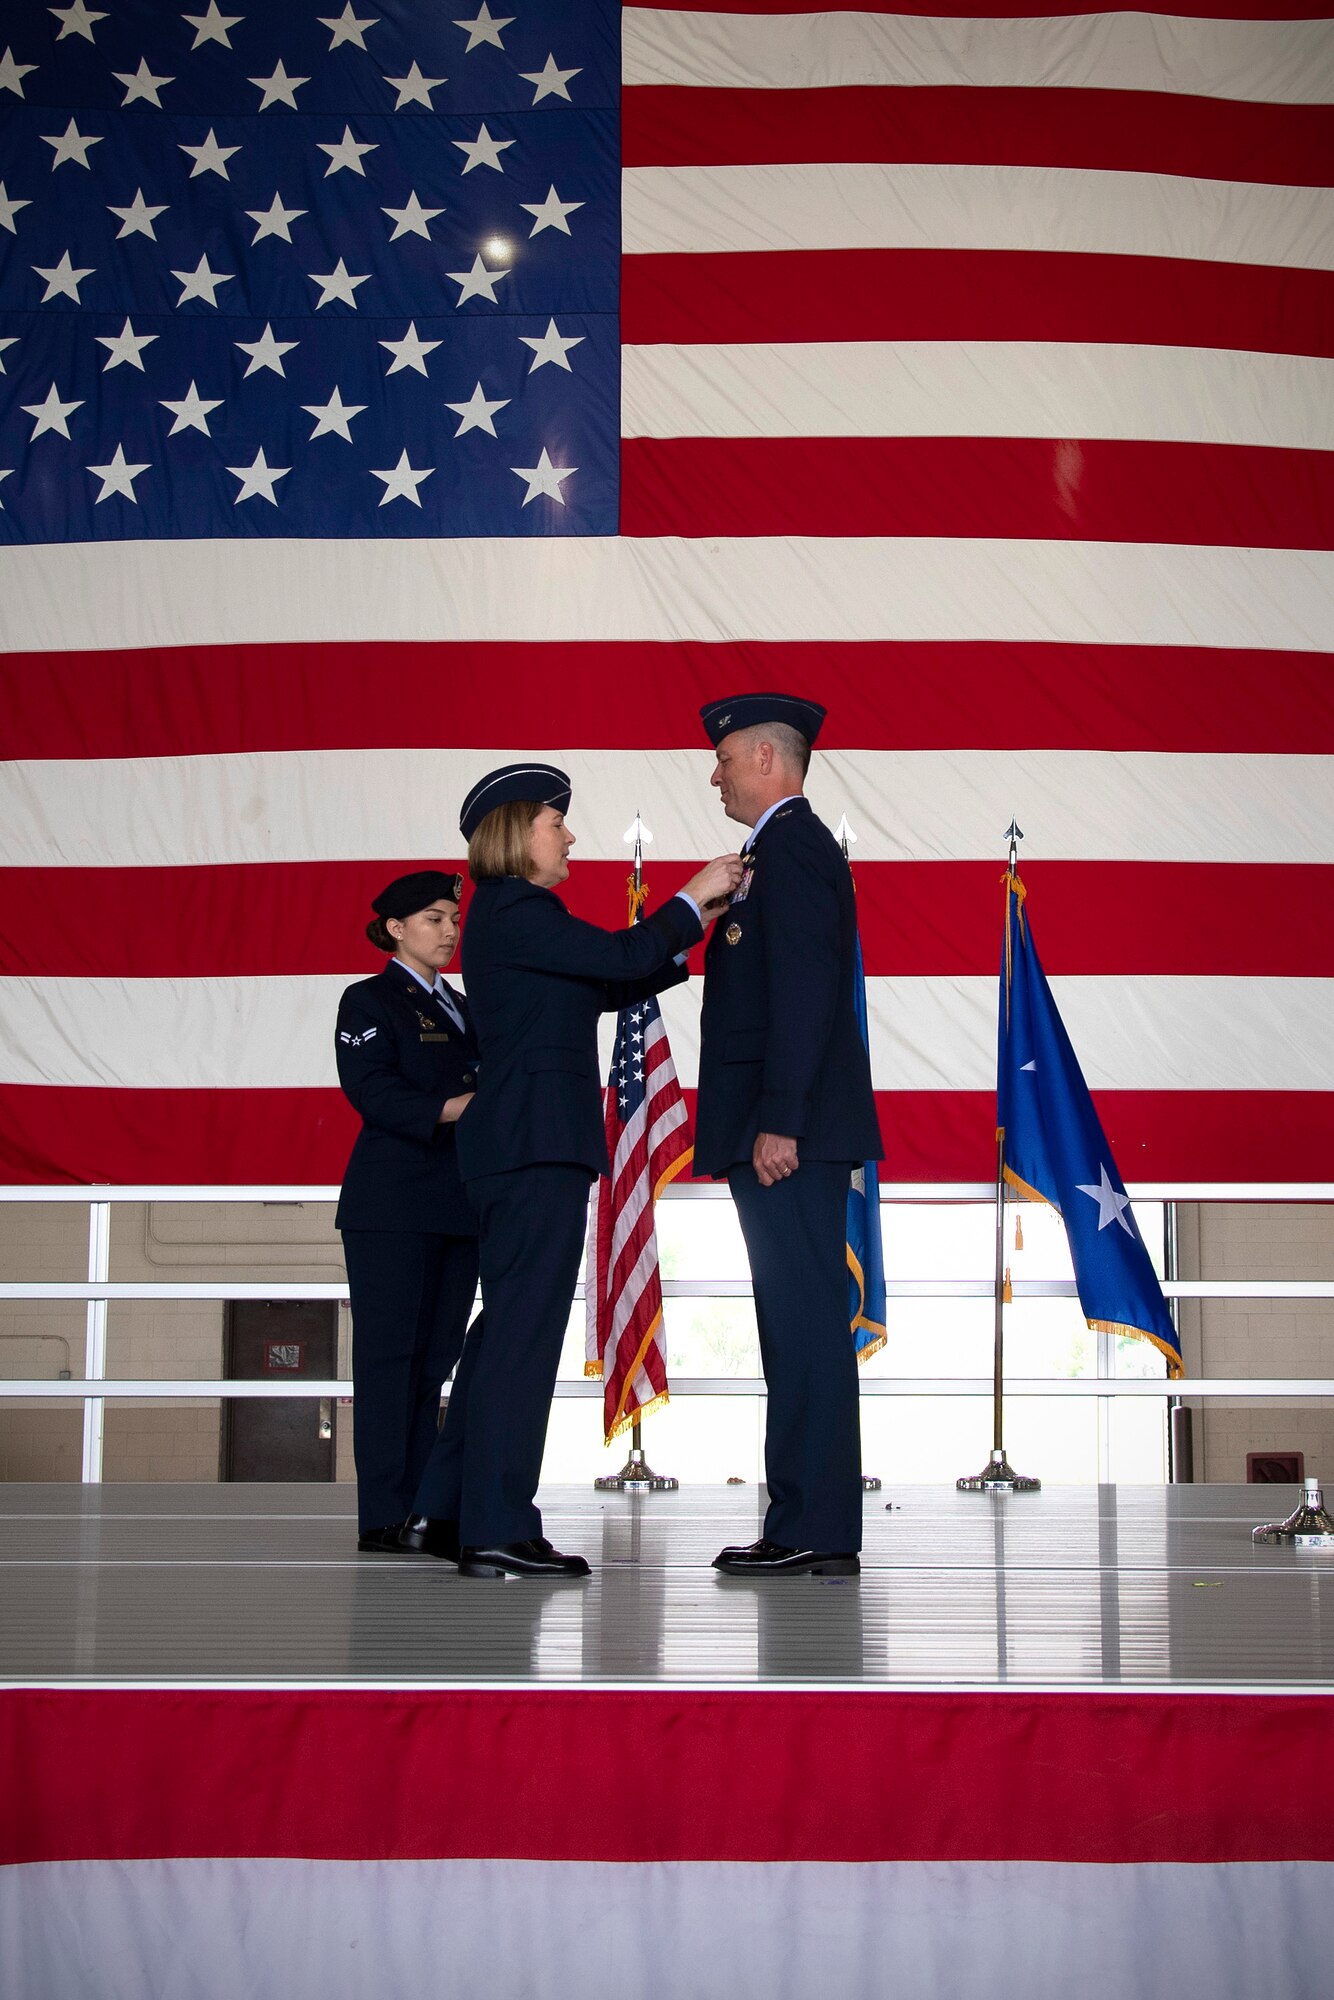 Col. Benjamin Spencer, 319th Air Base Wing commander, receives the Legion of Merit from Maj. Gen. Mary O’Brian, 25th Air Force commander, during a change of command ceremony June 28, 2019, on Grand Forks Air Force Base, North Dakota.